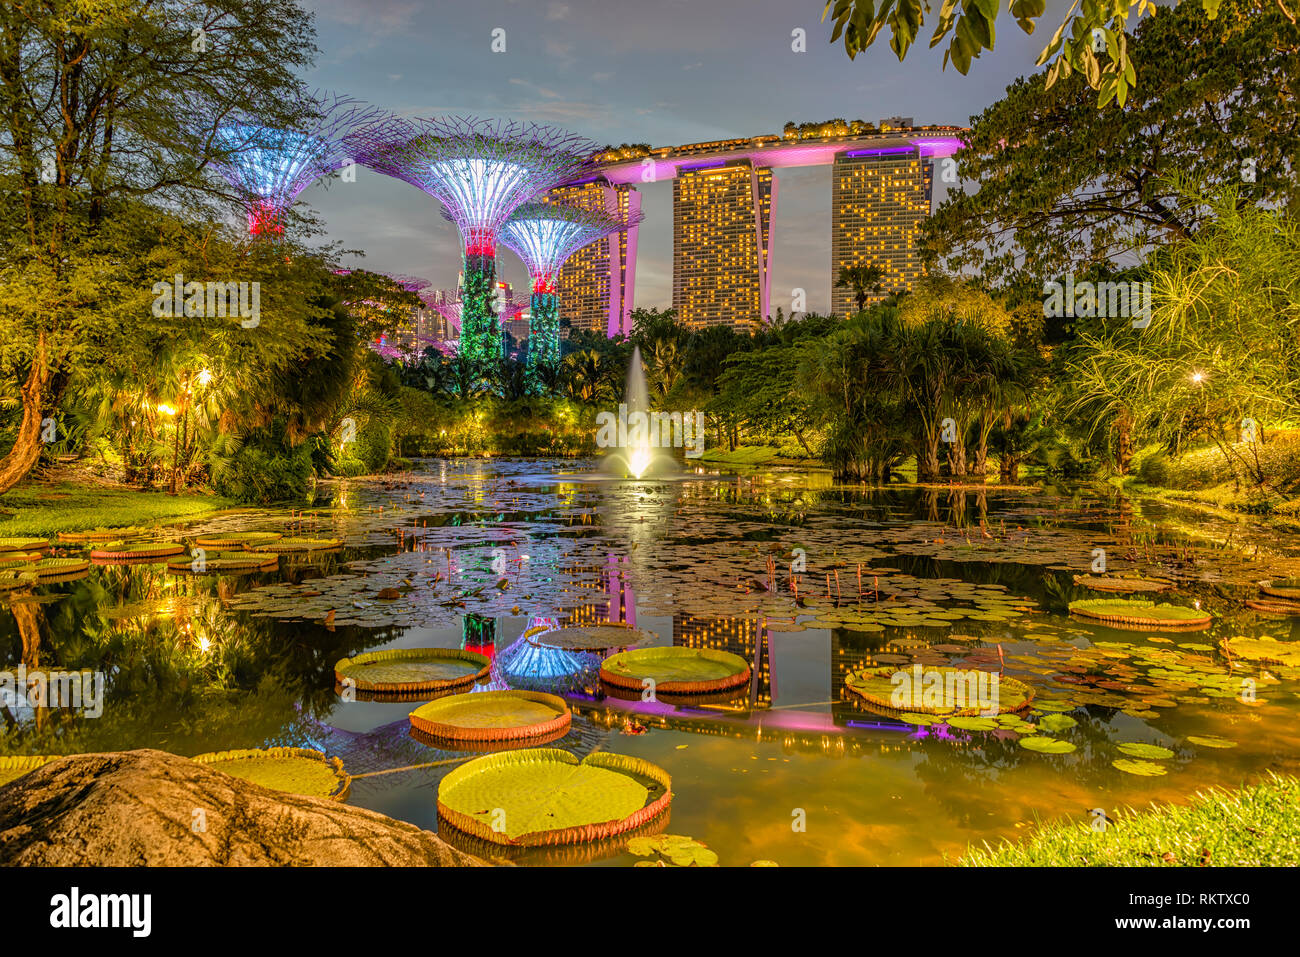 Illuminated Gardens by the Bay at night with the Marina Bay Sands Hotel in the background, Singapore Stock Photo